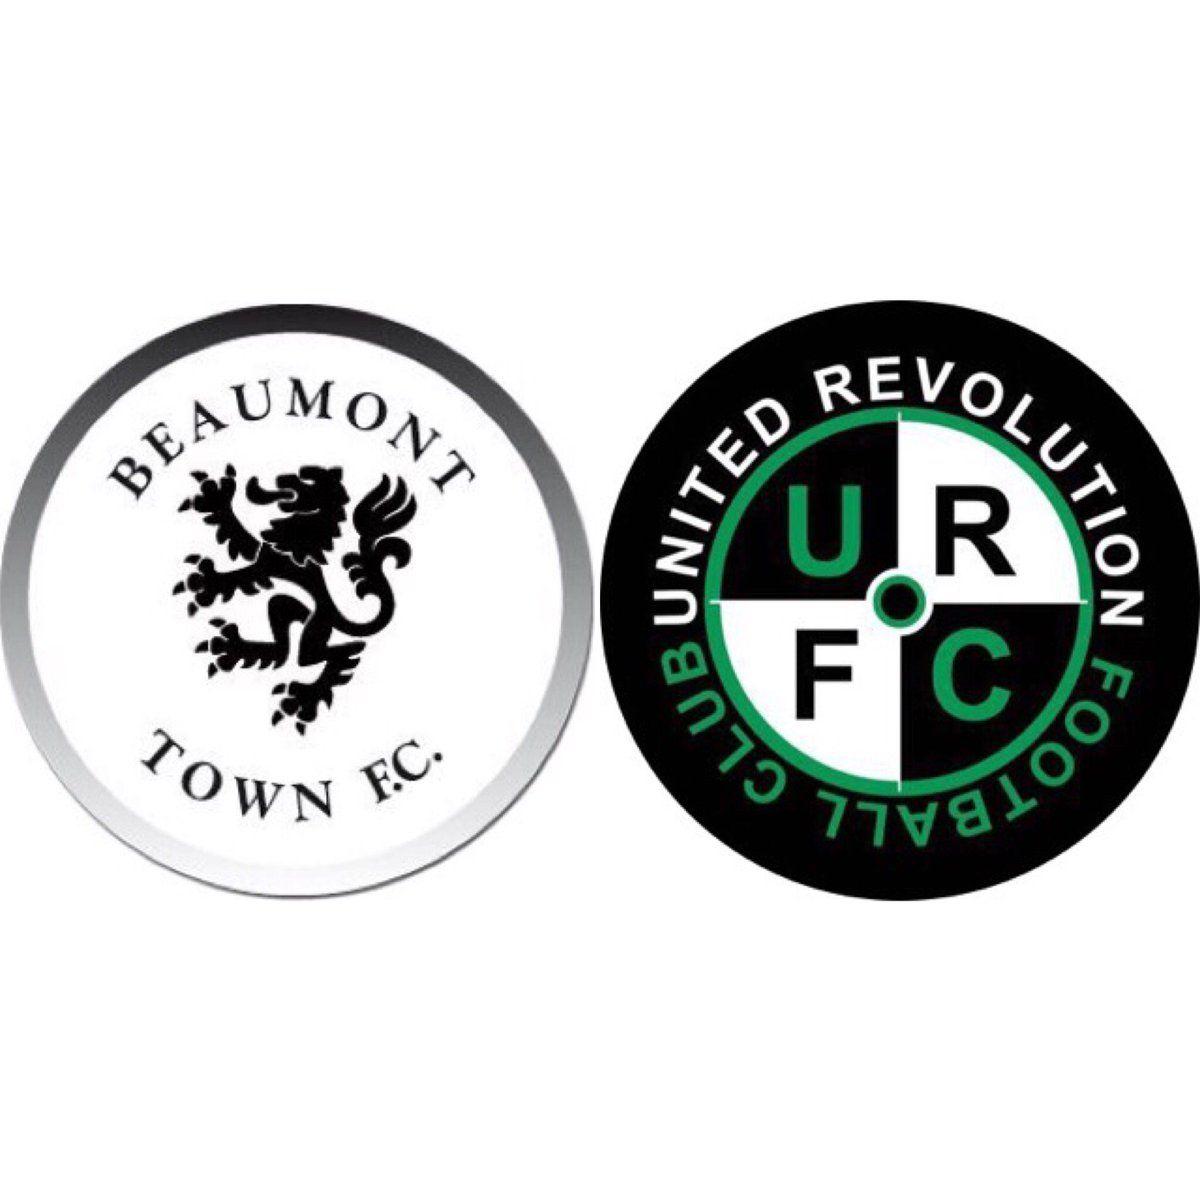 Town of Beaumont Logo - Beaumont Town Fc mens